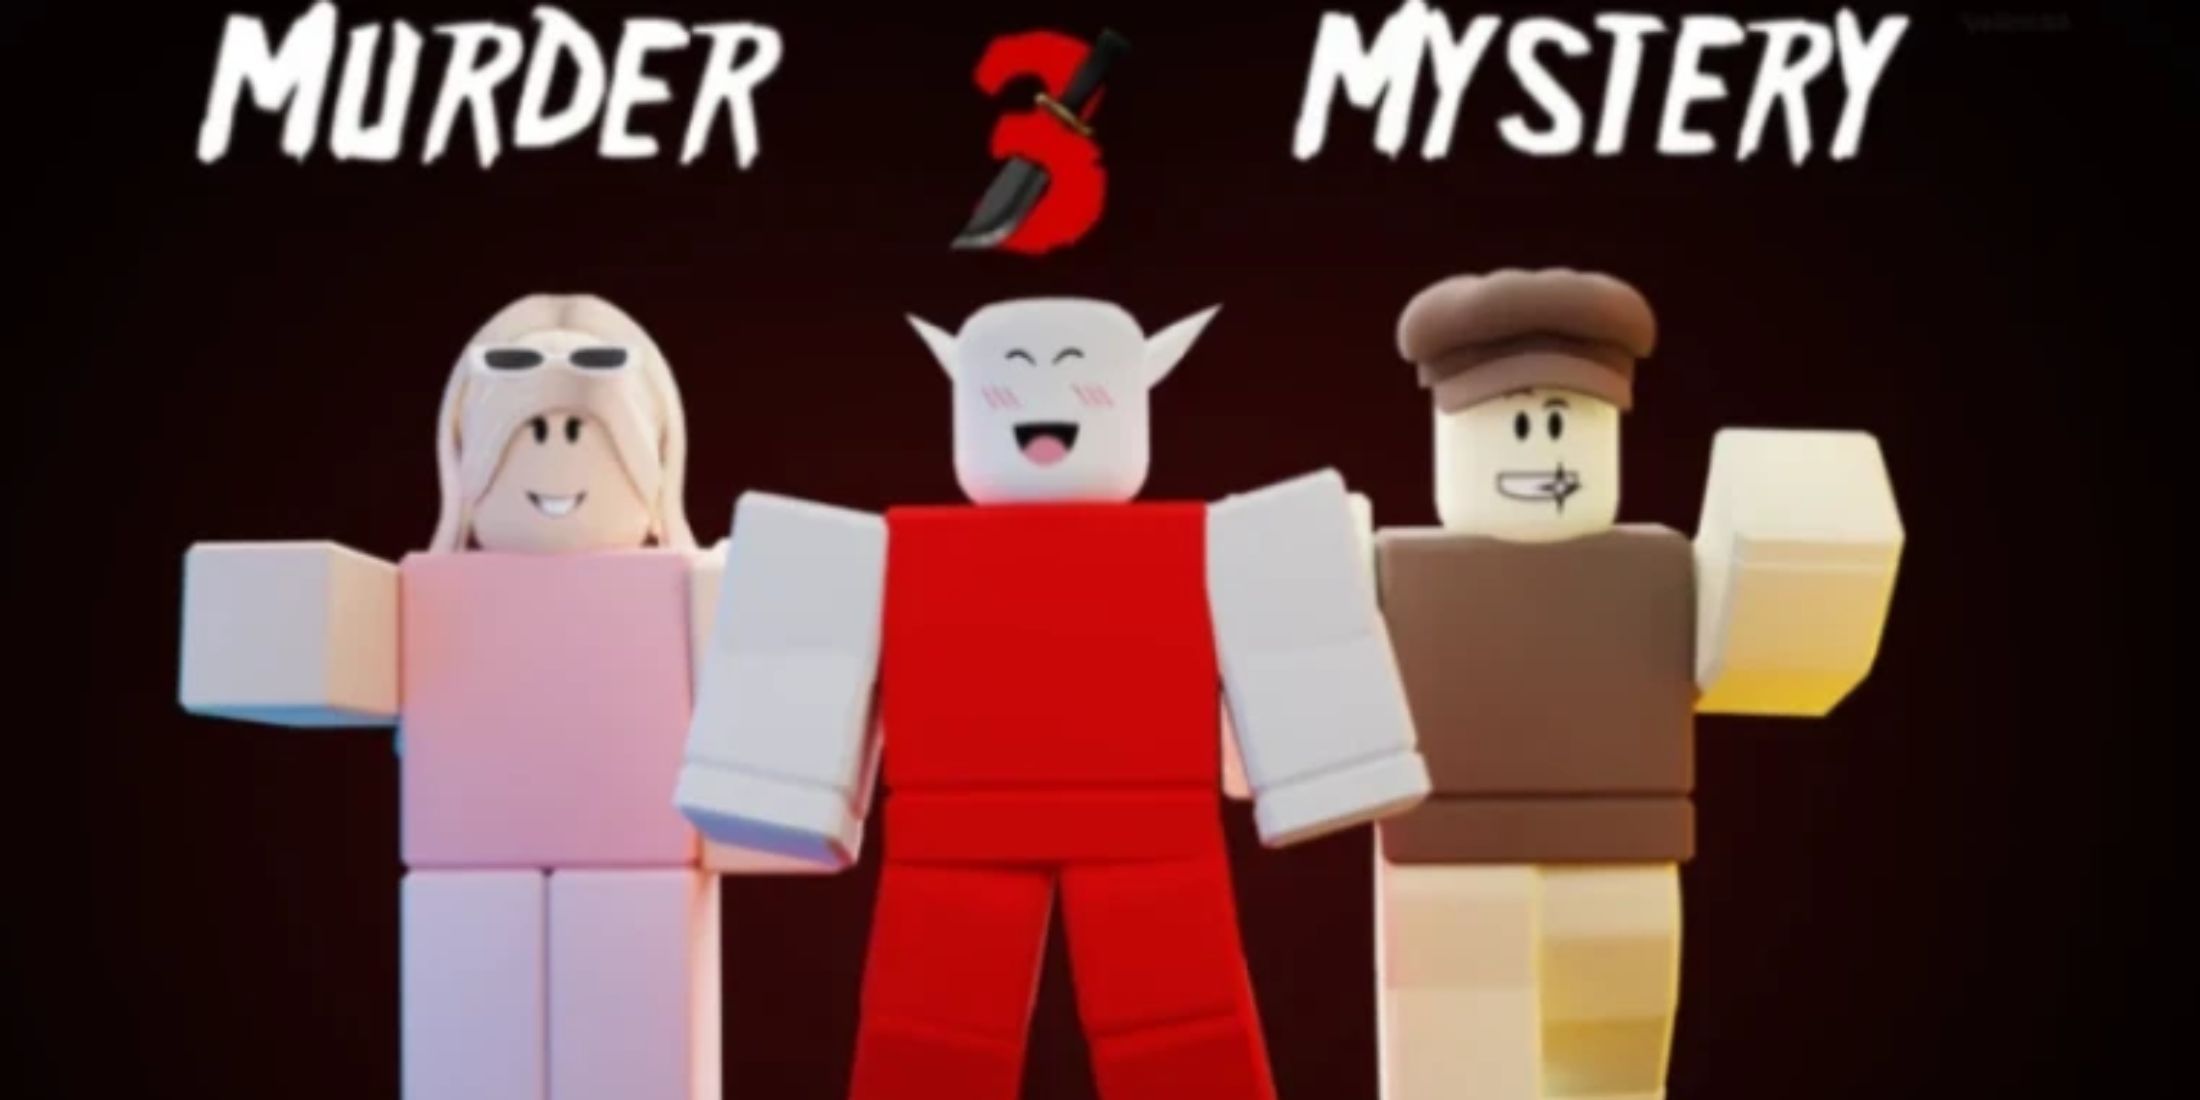 Murder Mystery 3 characters